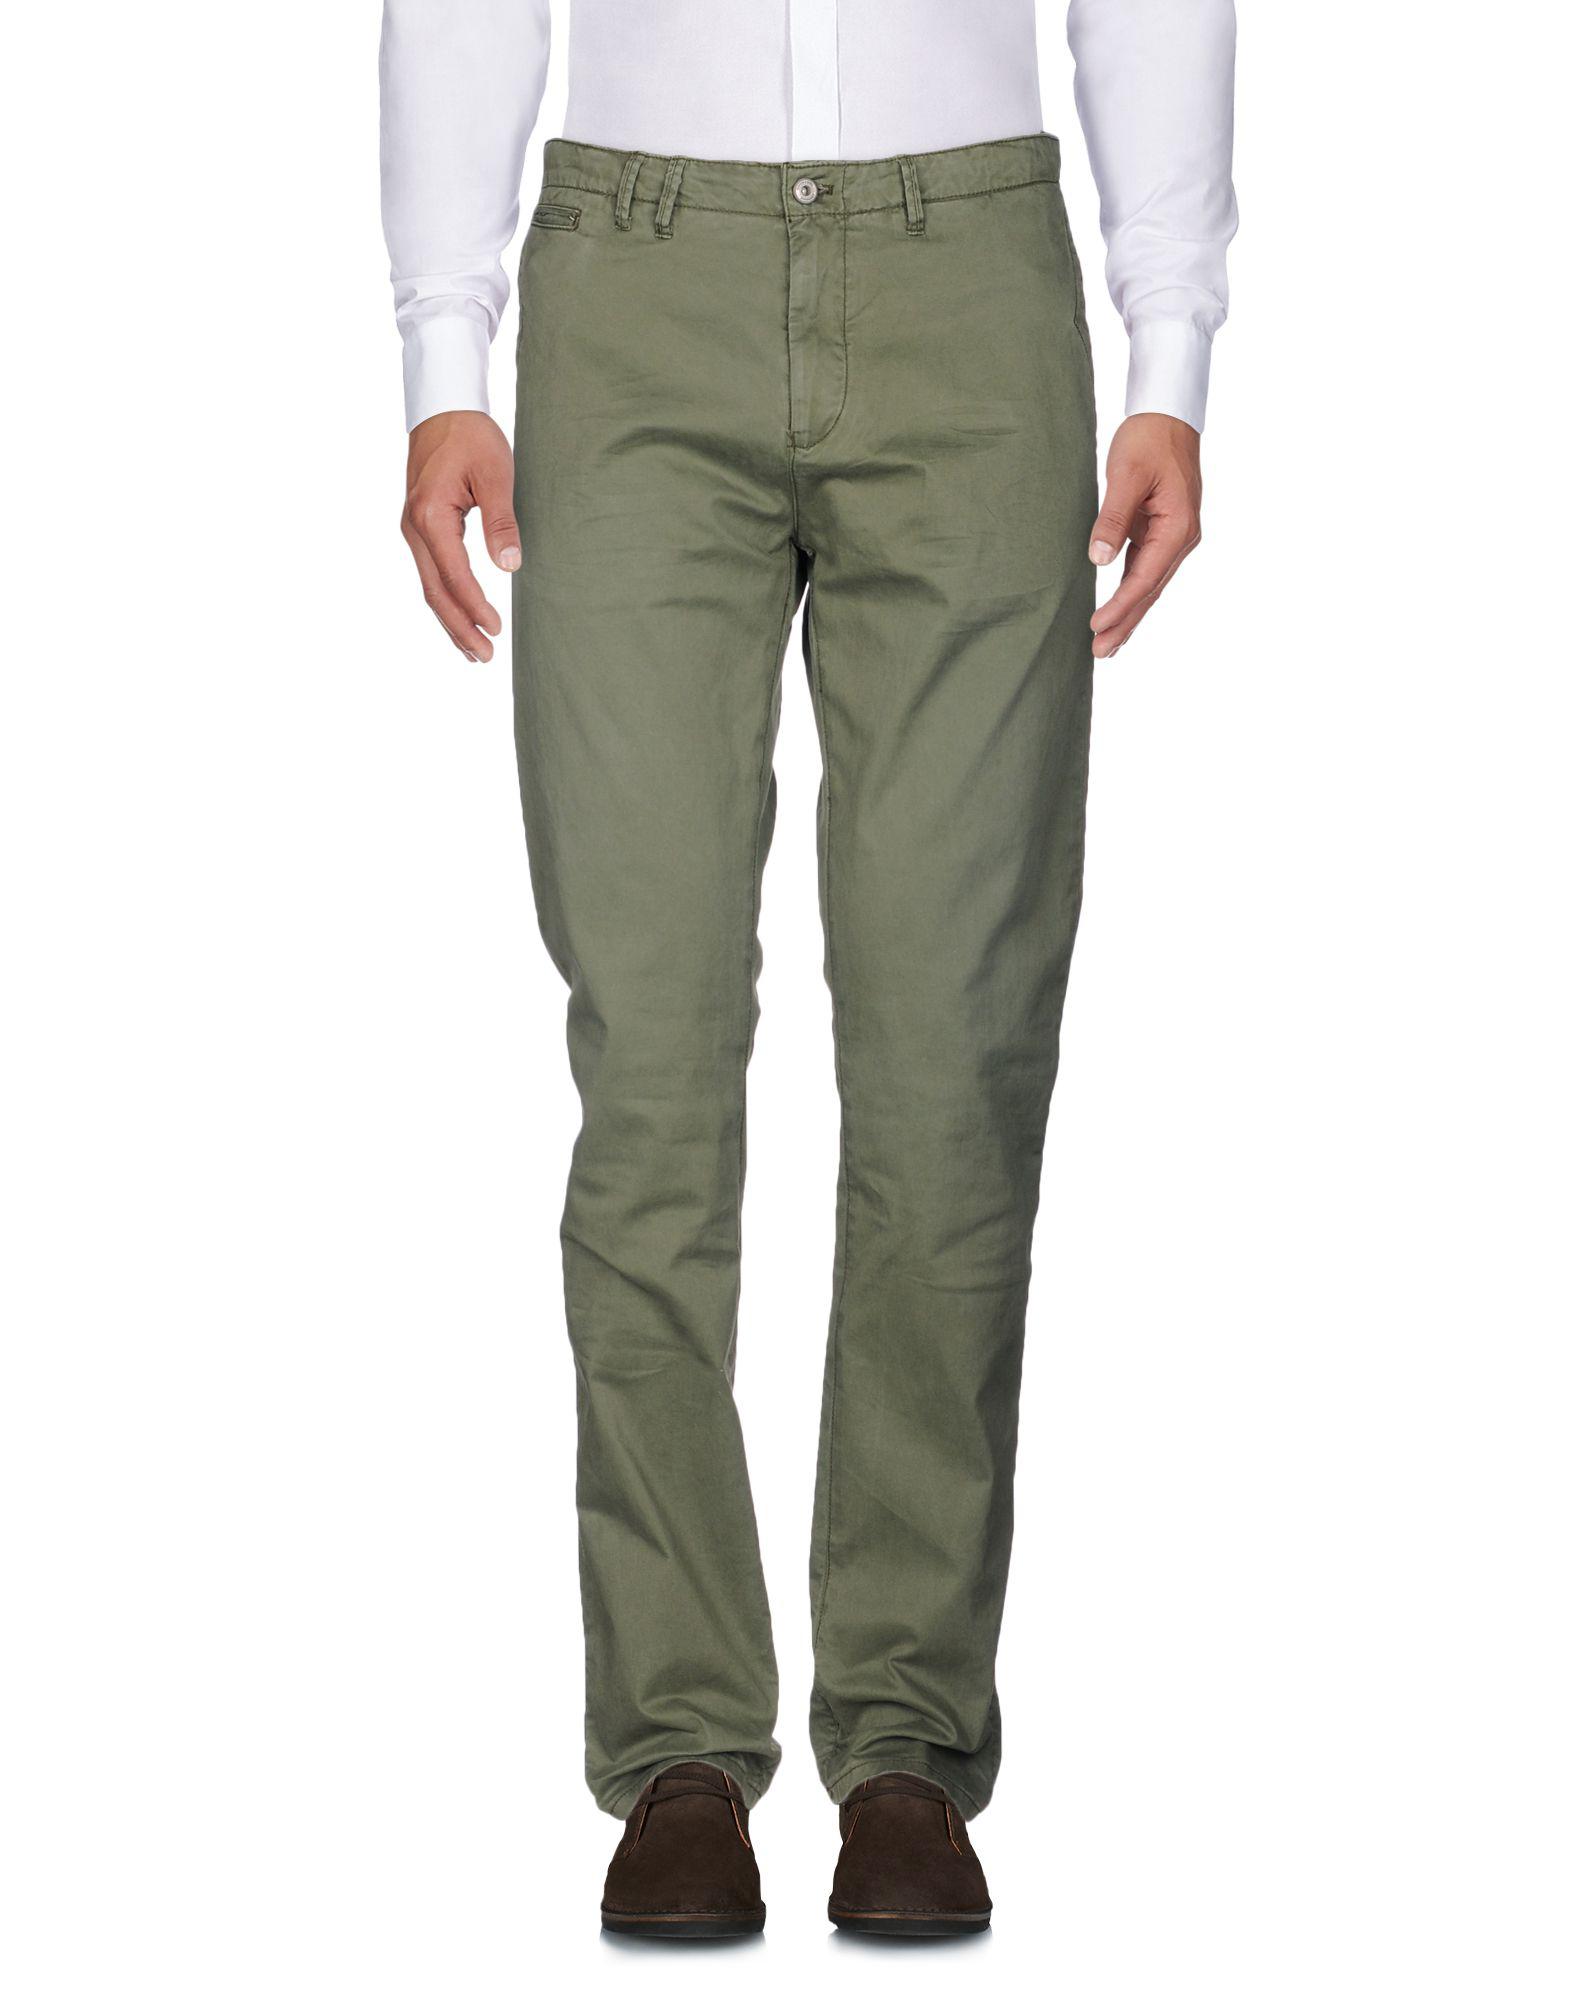 Scotch & Soda Leather Casual Pants in Military Green (Green) for Men - Lyst